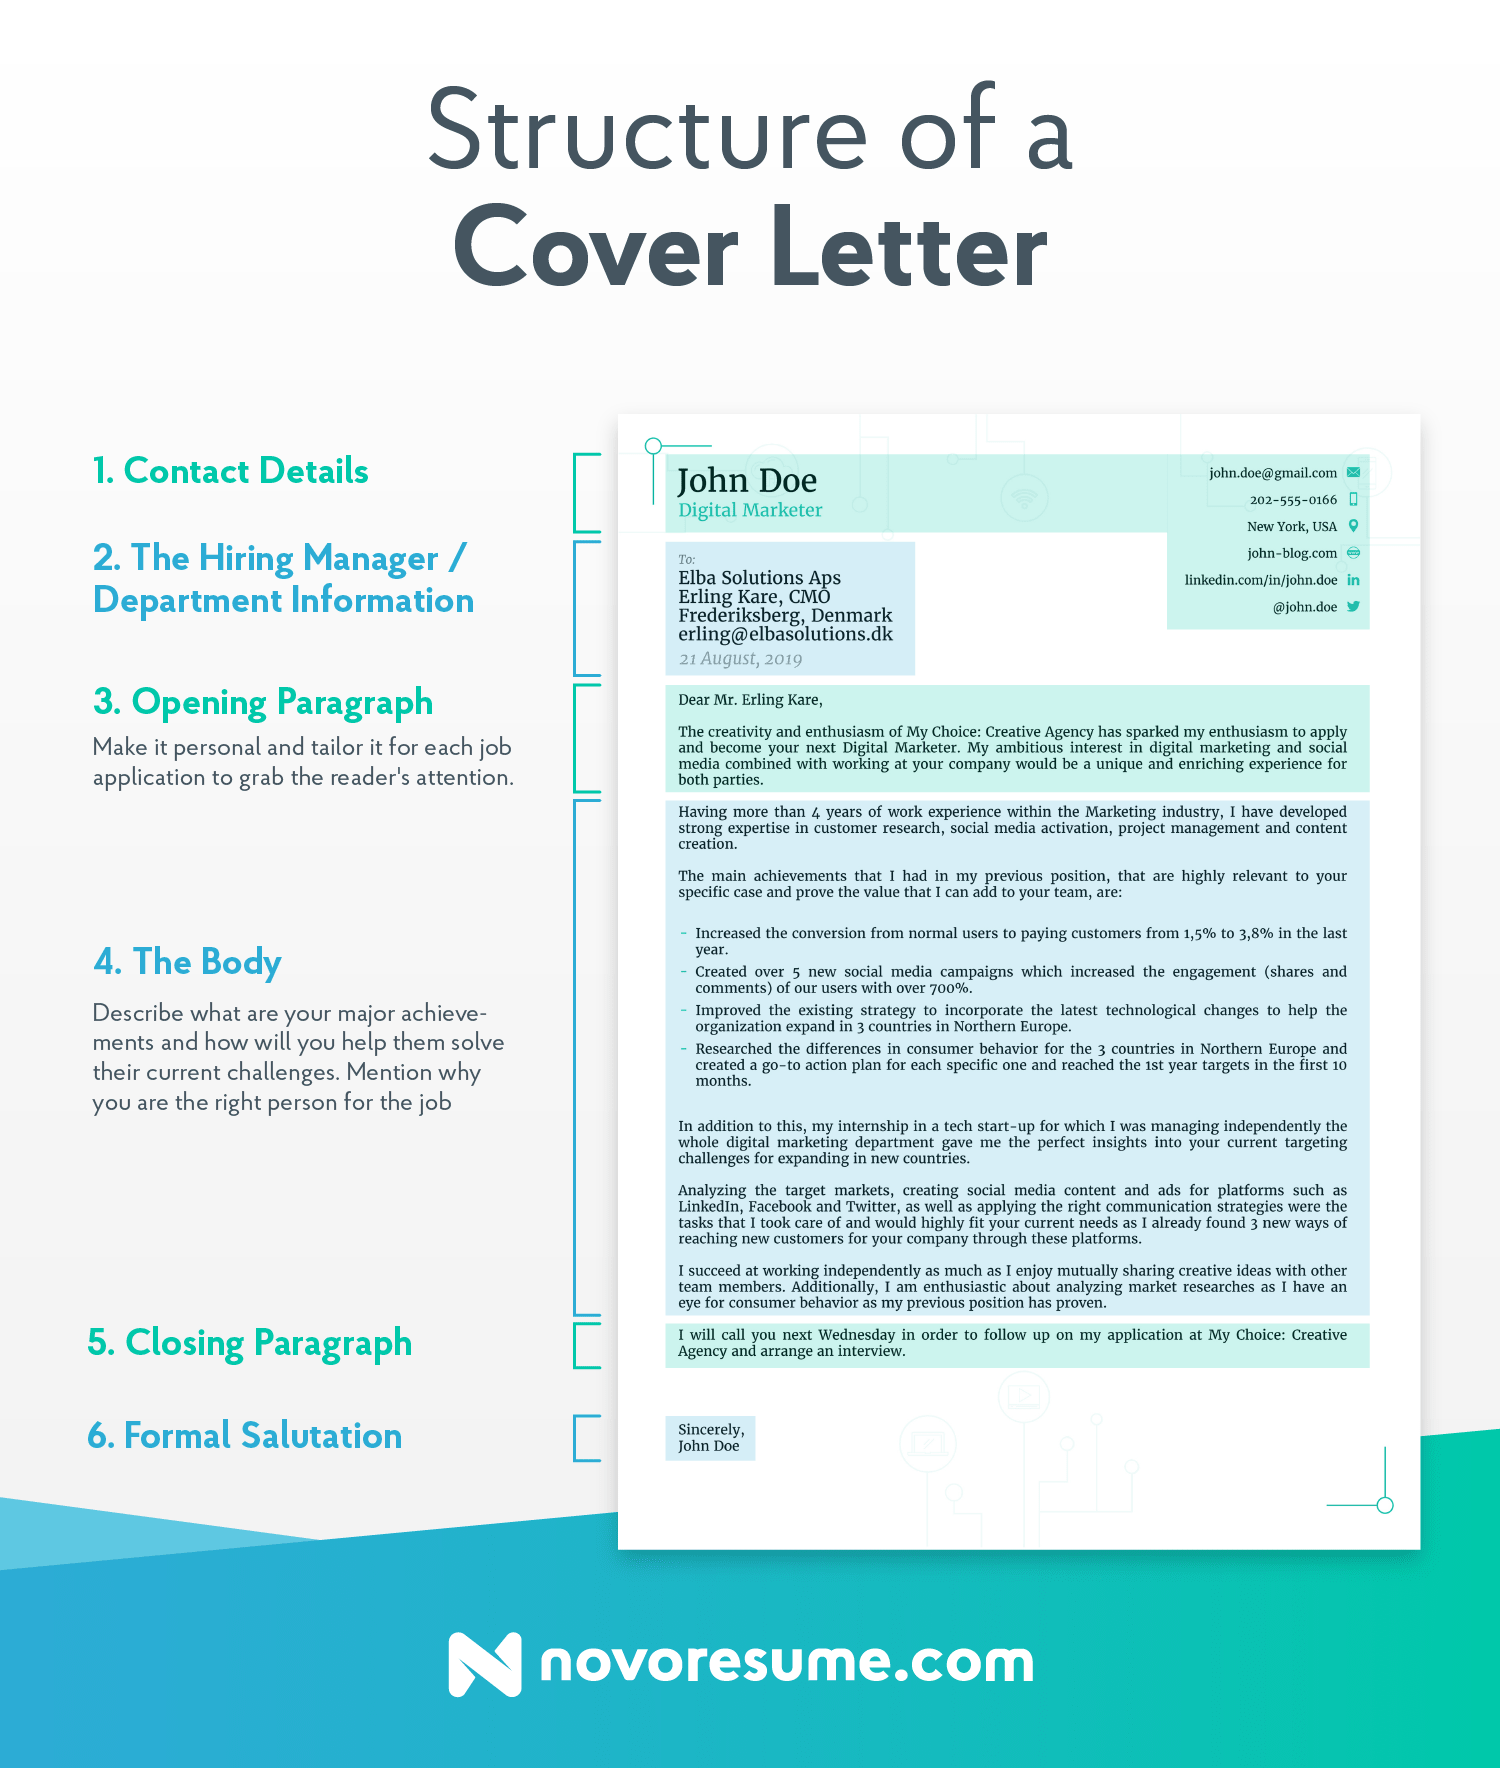 cover letter structure banking